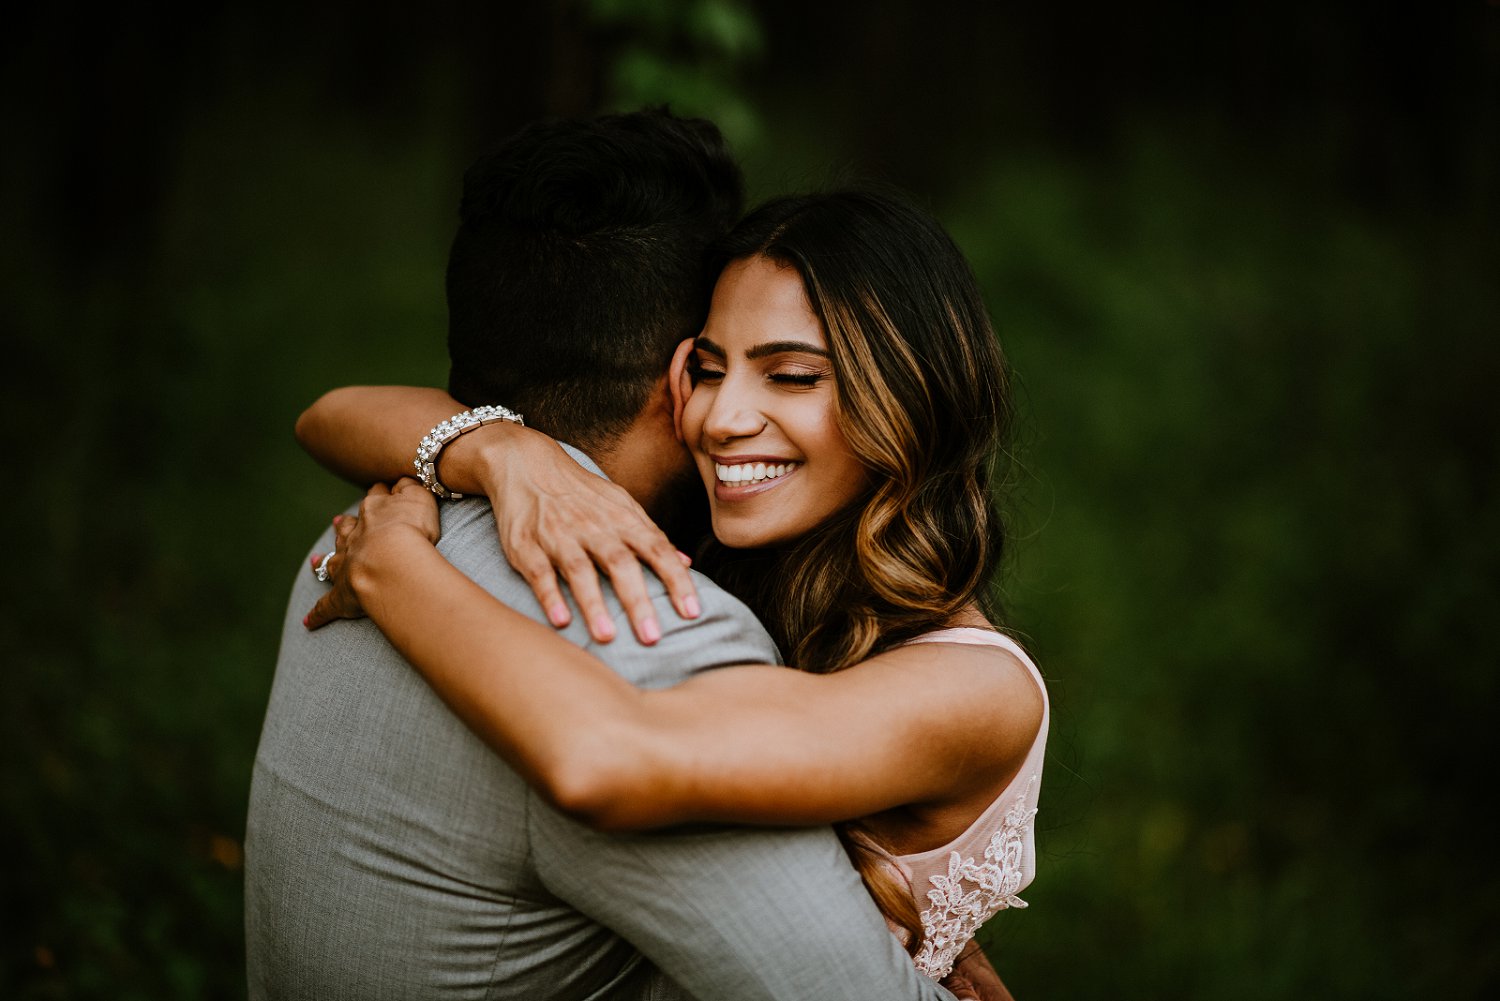 the woodlands forest engagement session